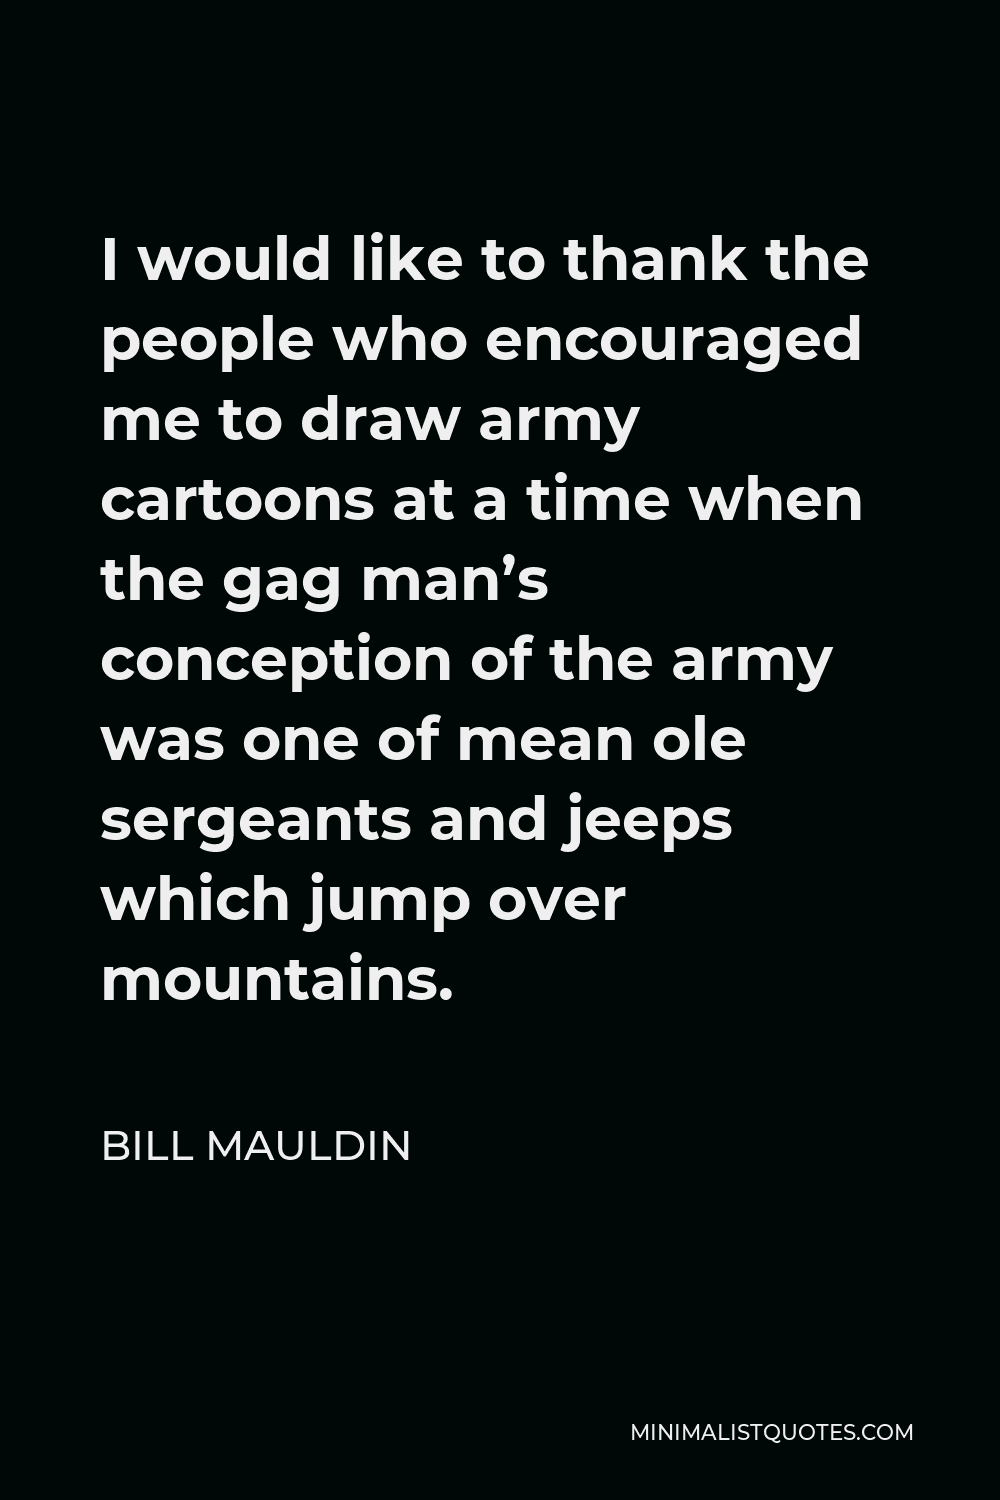 Bill Mauldin Quote - I would like to thank the people who encouraged me to draw army cartoons at a time when the gag man’s conception of the army was one of mean ole sergeants and jeeps which jump over mountains.